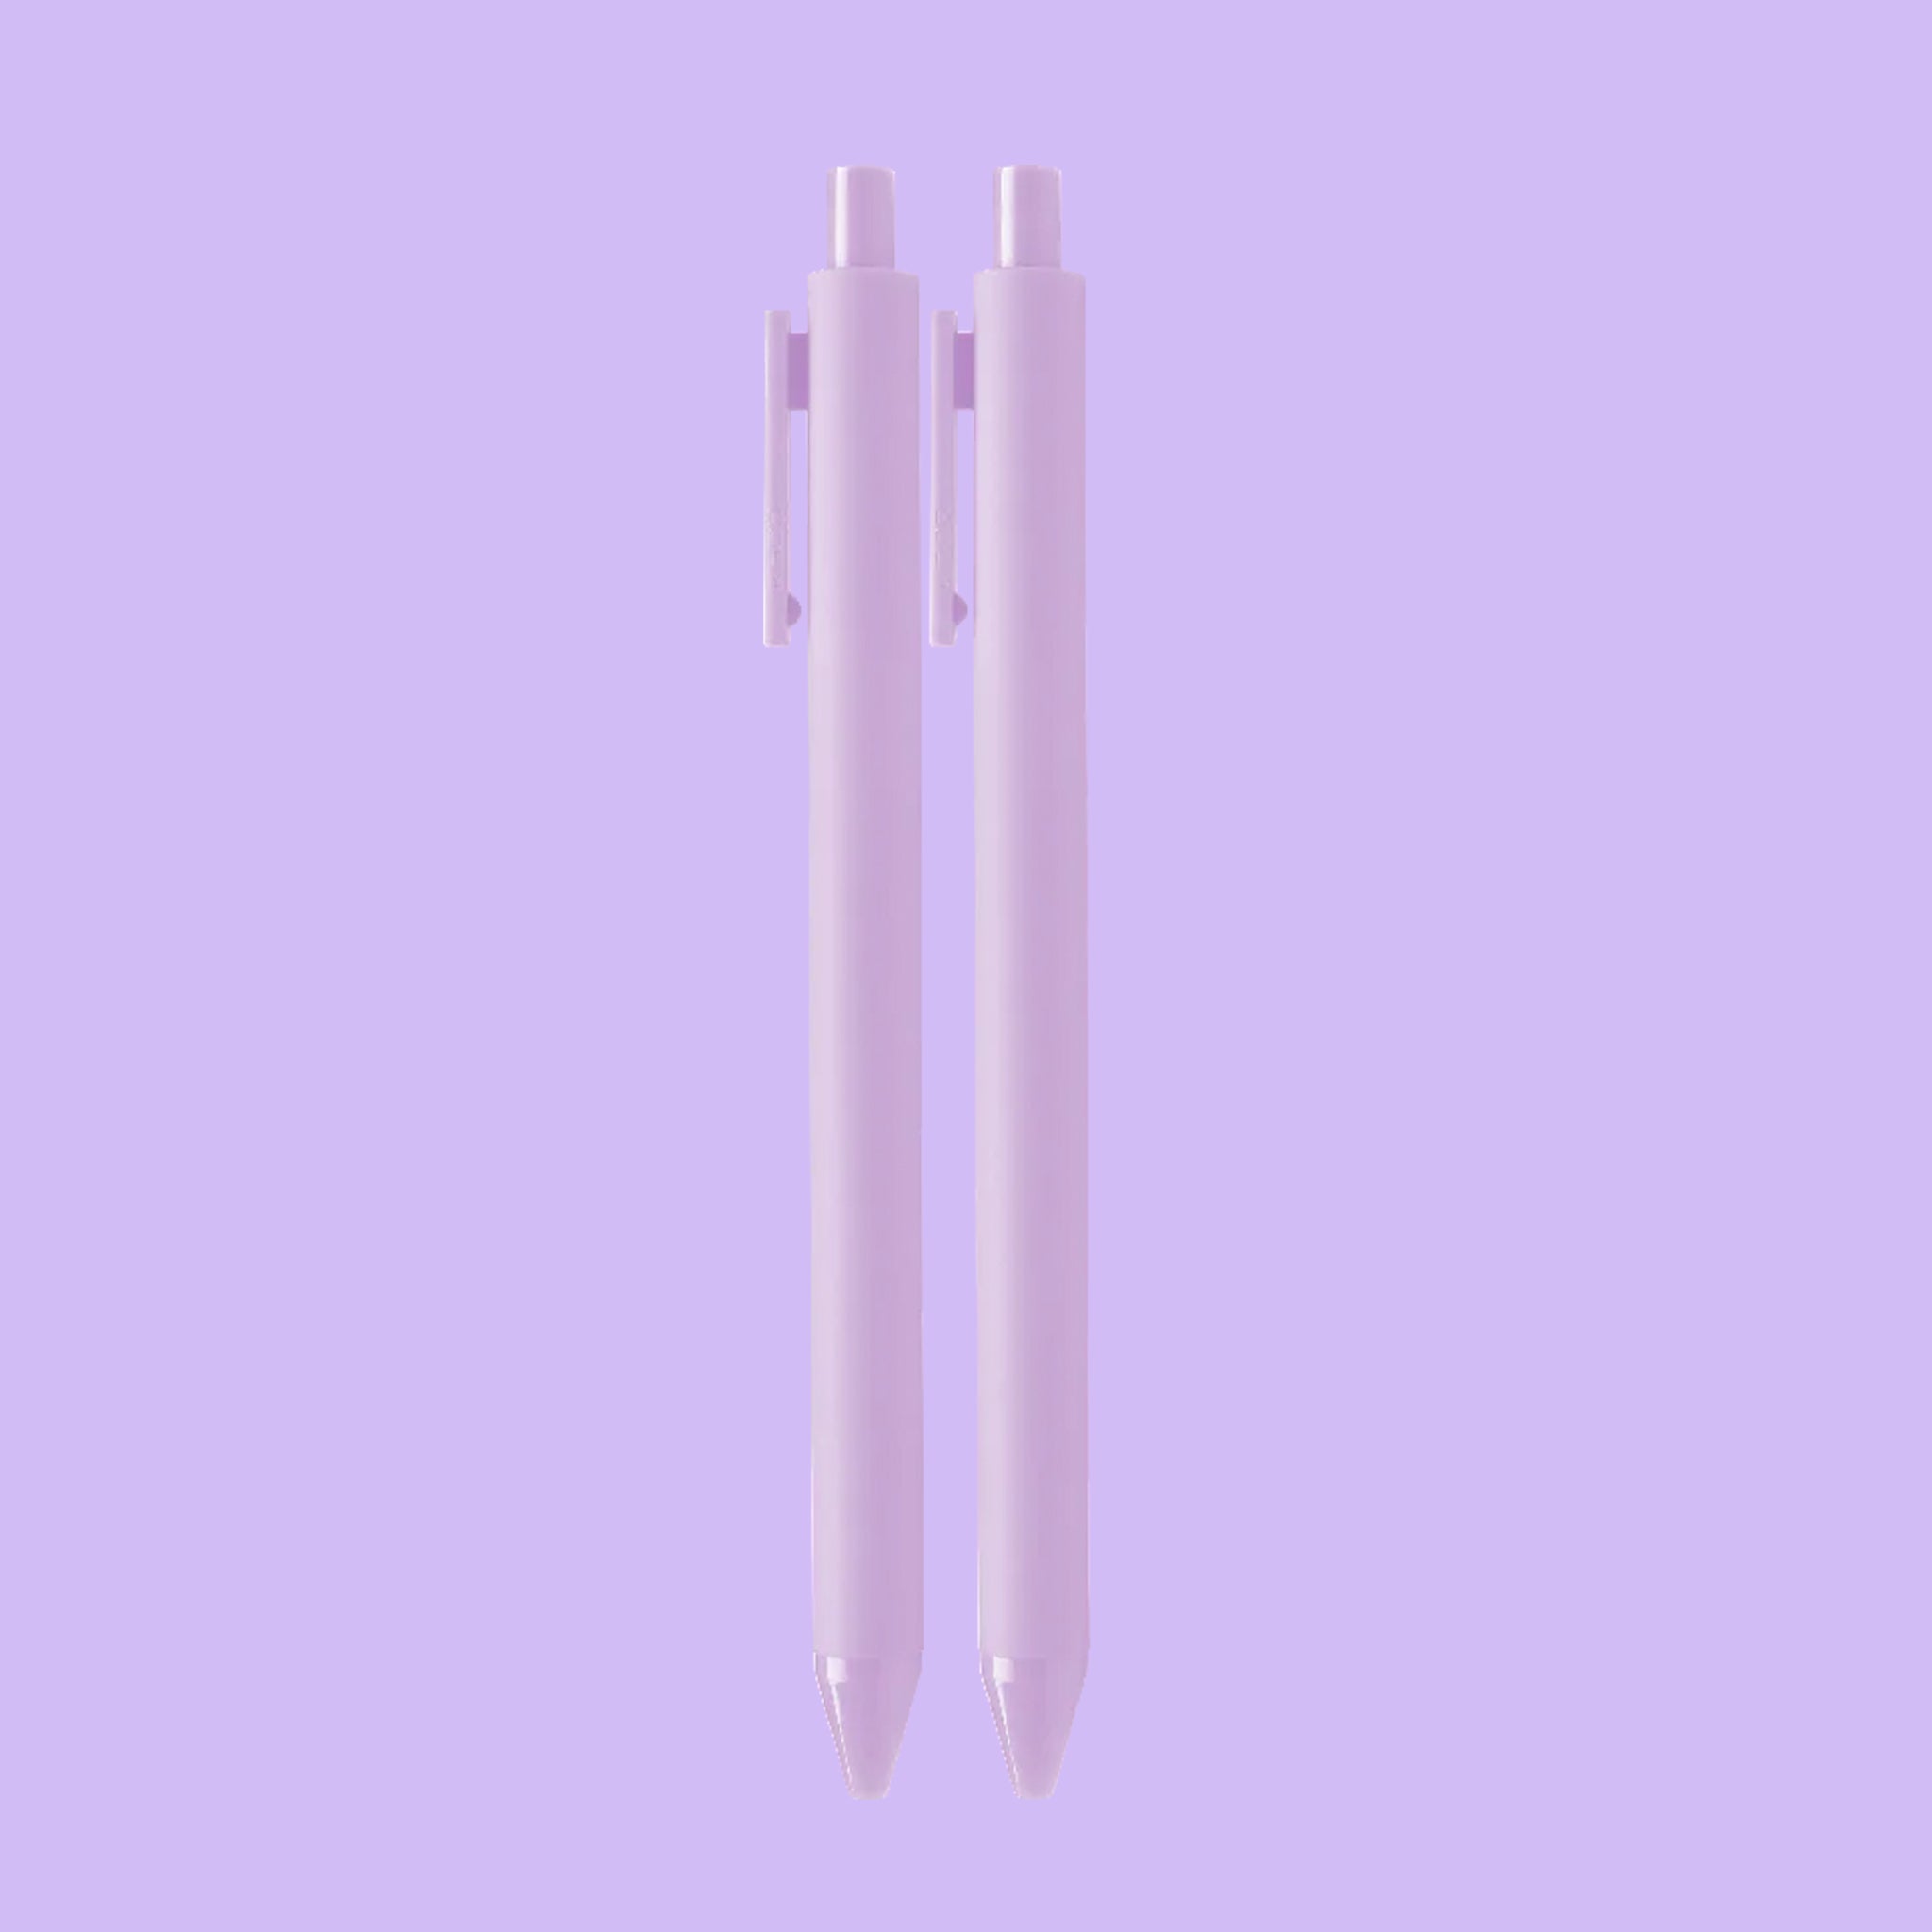 On a purple background is a set of two ballpoint pens with a light purple exterior. 